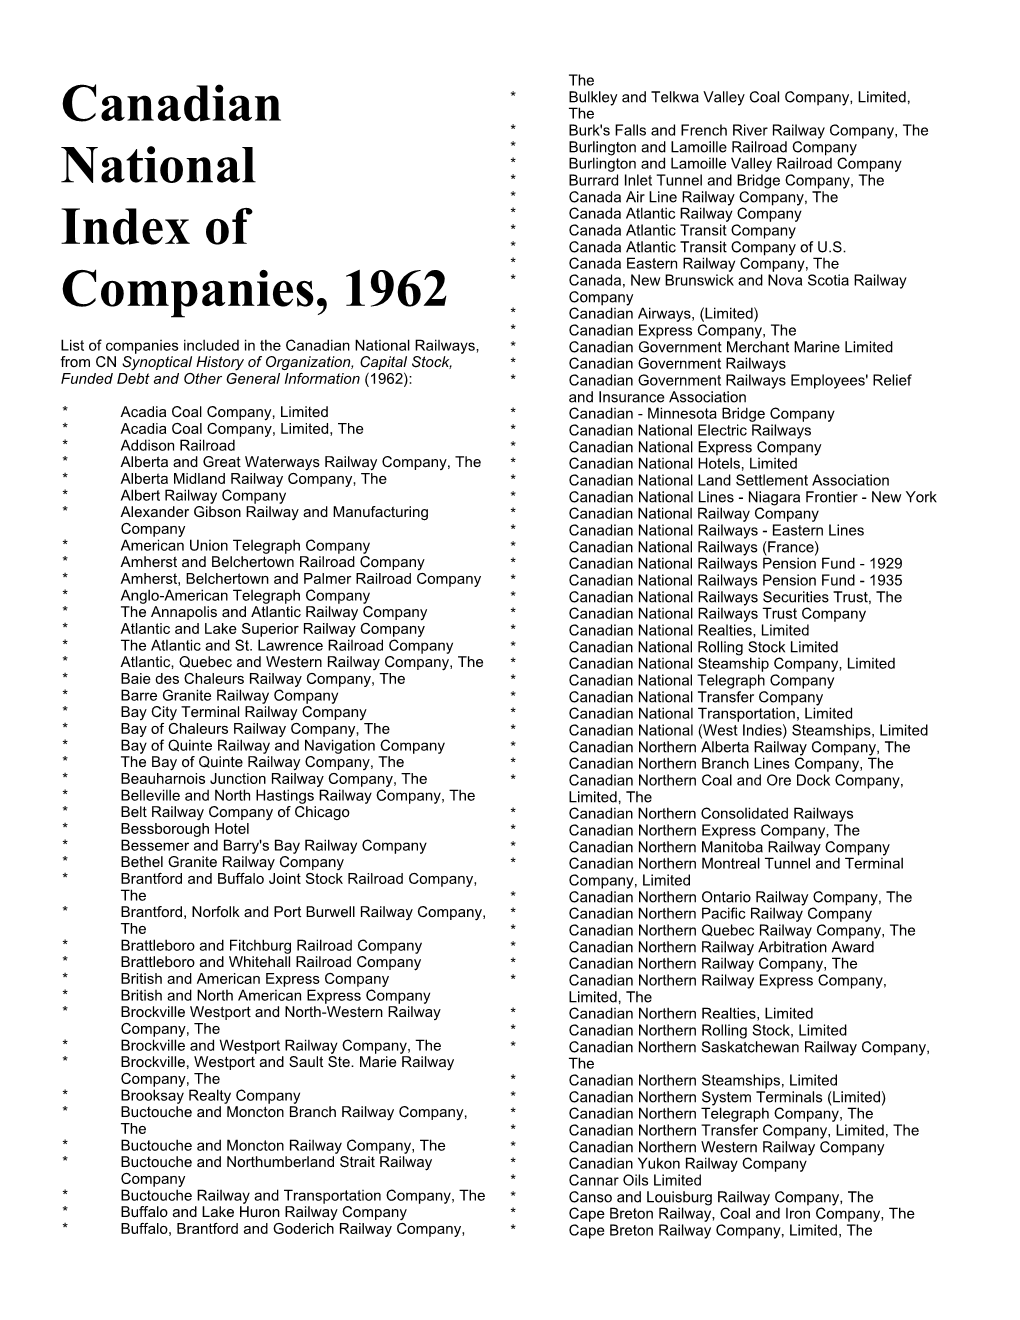 Canadian National Railway Index of Companies 1962